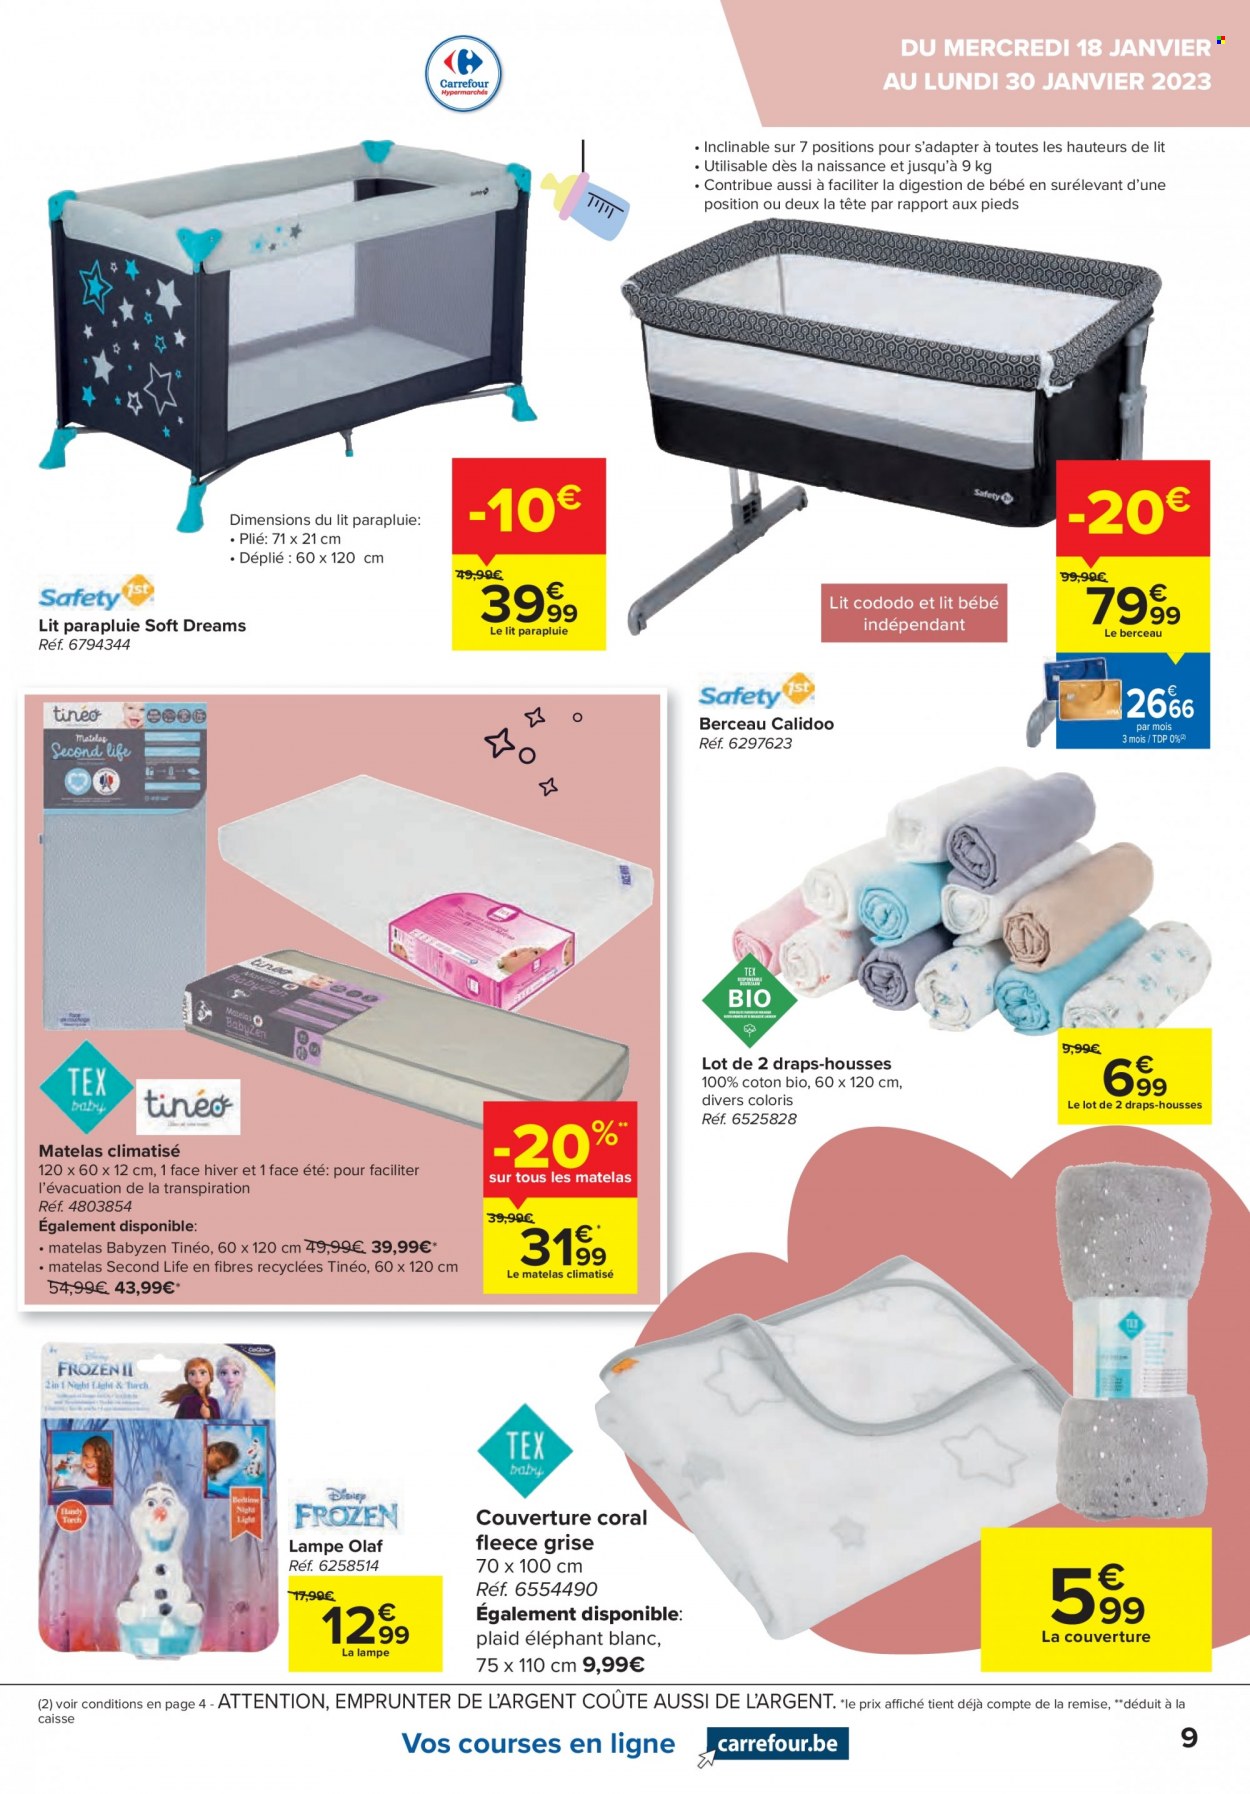 Catalogue Carrefour hypermarkt - 18.1.2023 - 30.1.2023. Page 9.